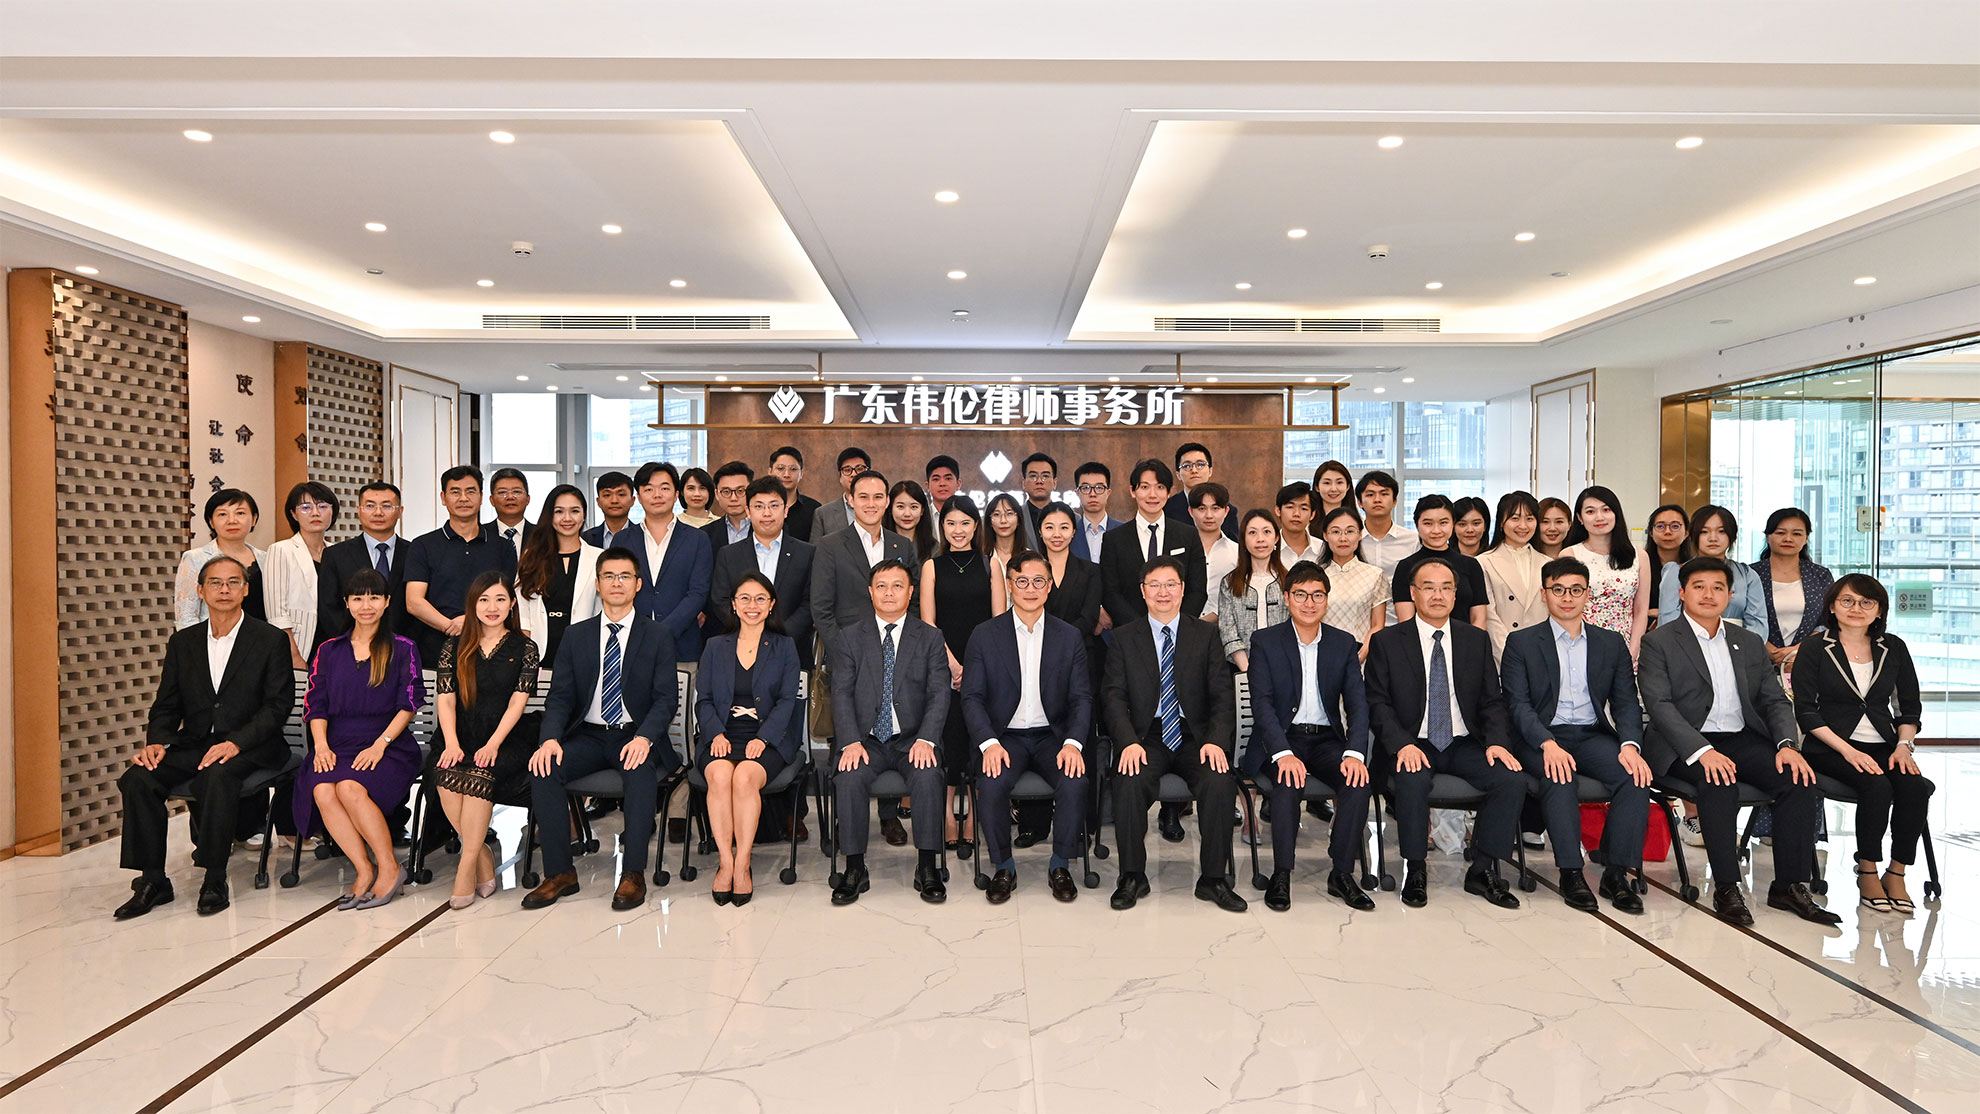 The Deputy Secretary for Justice, Mr Cheung Kwok-kwan (first row, centre), leading a delegation comprising young lawyers and law students, today (September 8) visited a well-established Mainland law firm in Huizhou to have in-depth exchanges with their local counterparts on the challenges in handling cross-boundary civil and commercial as well as arbitration matters and explore room for strengthening co-operation between the legal sectors of both places.